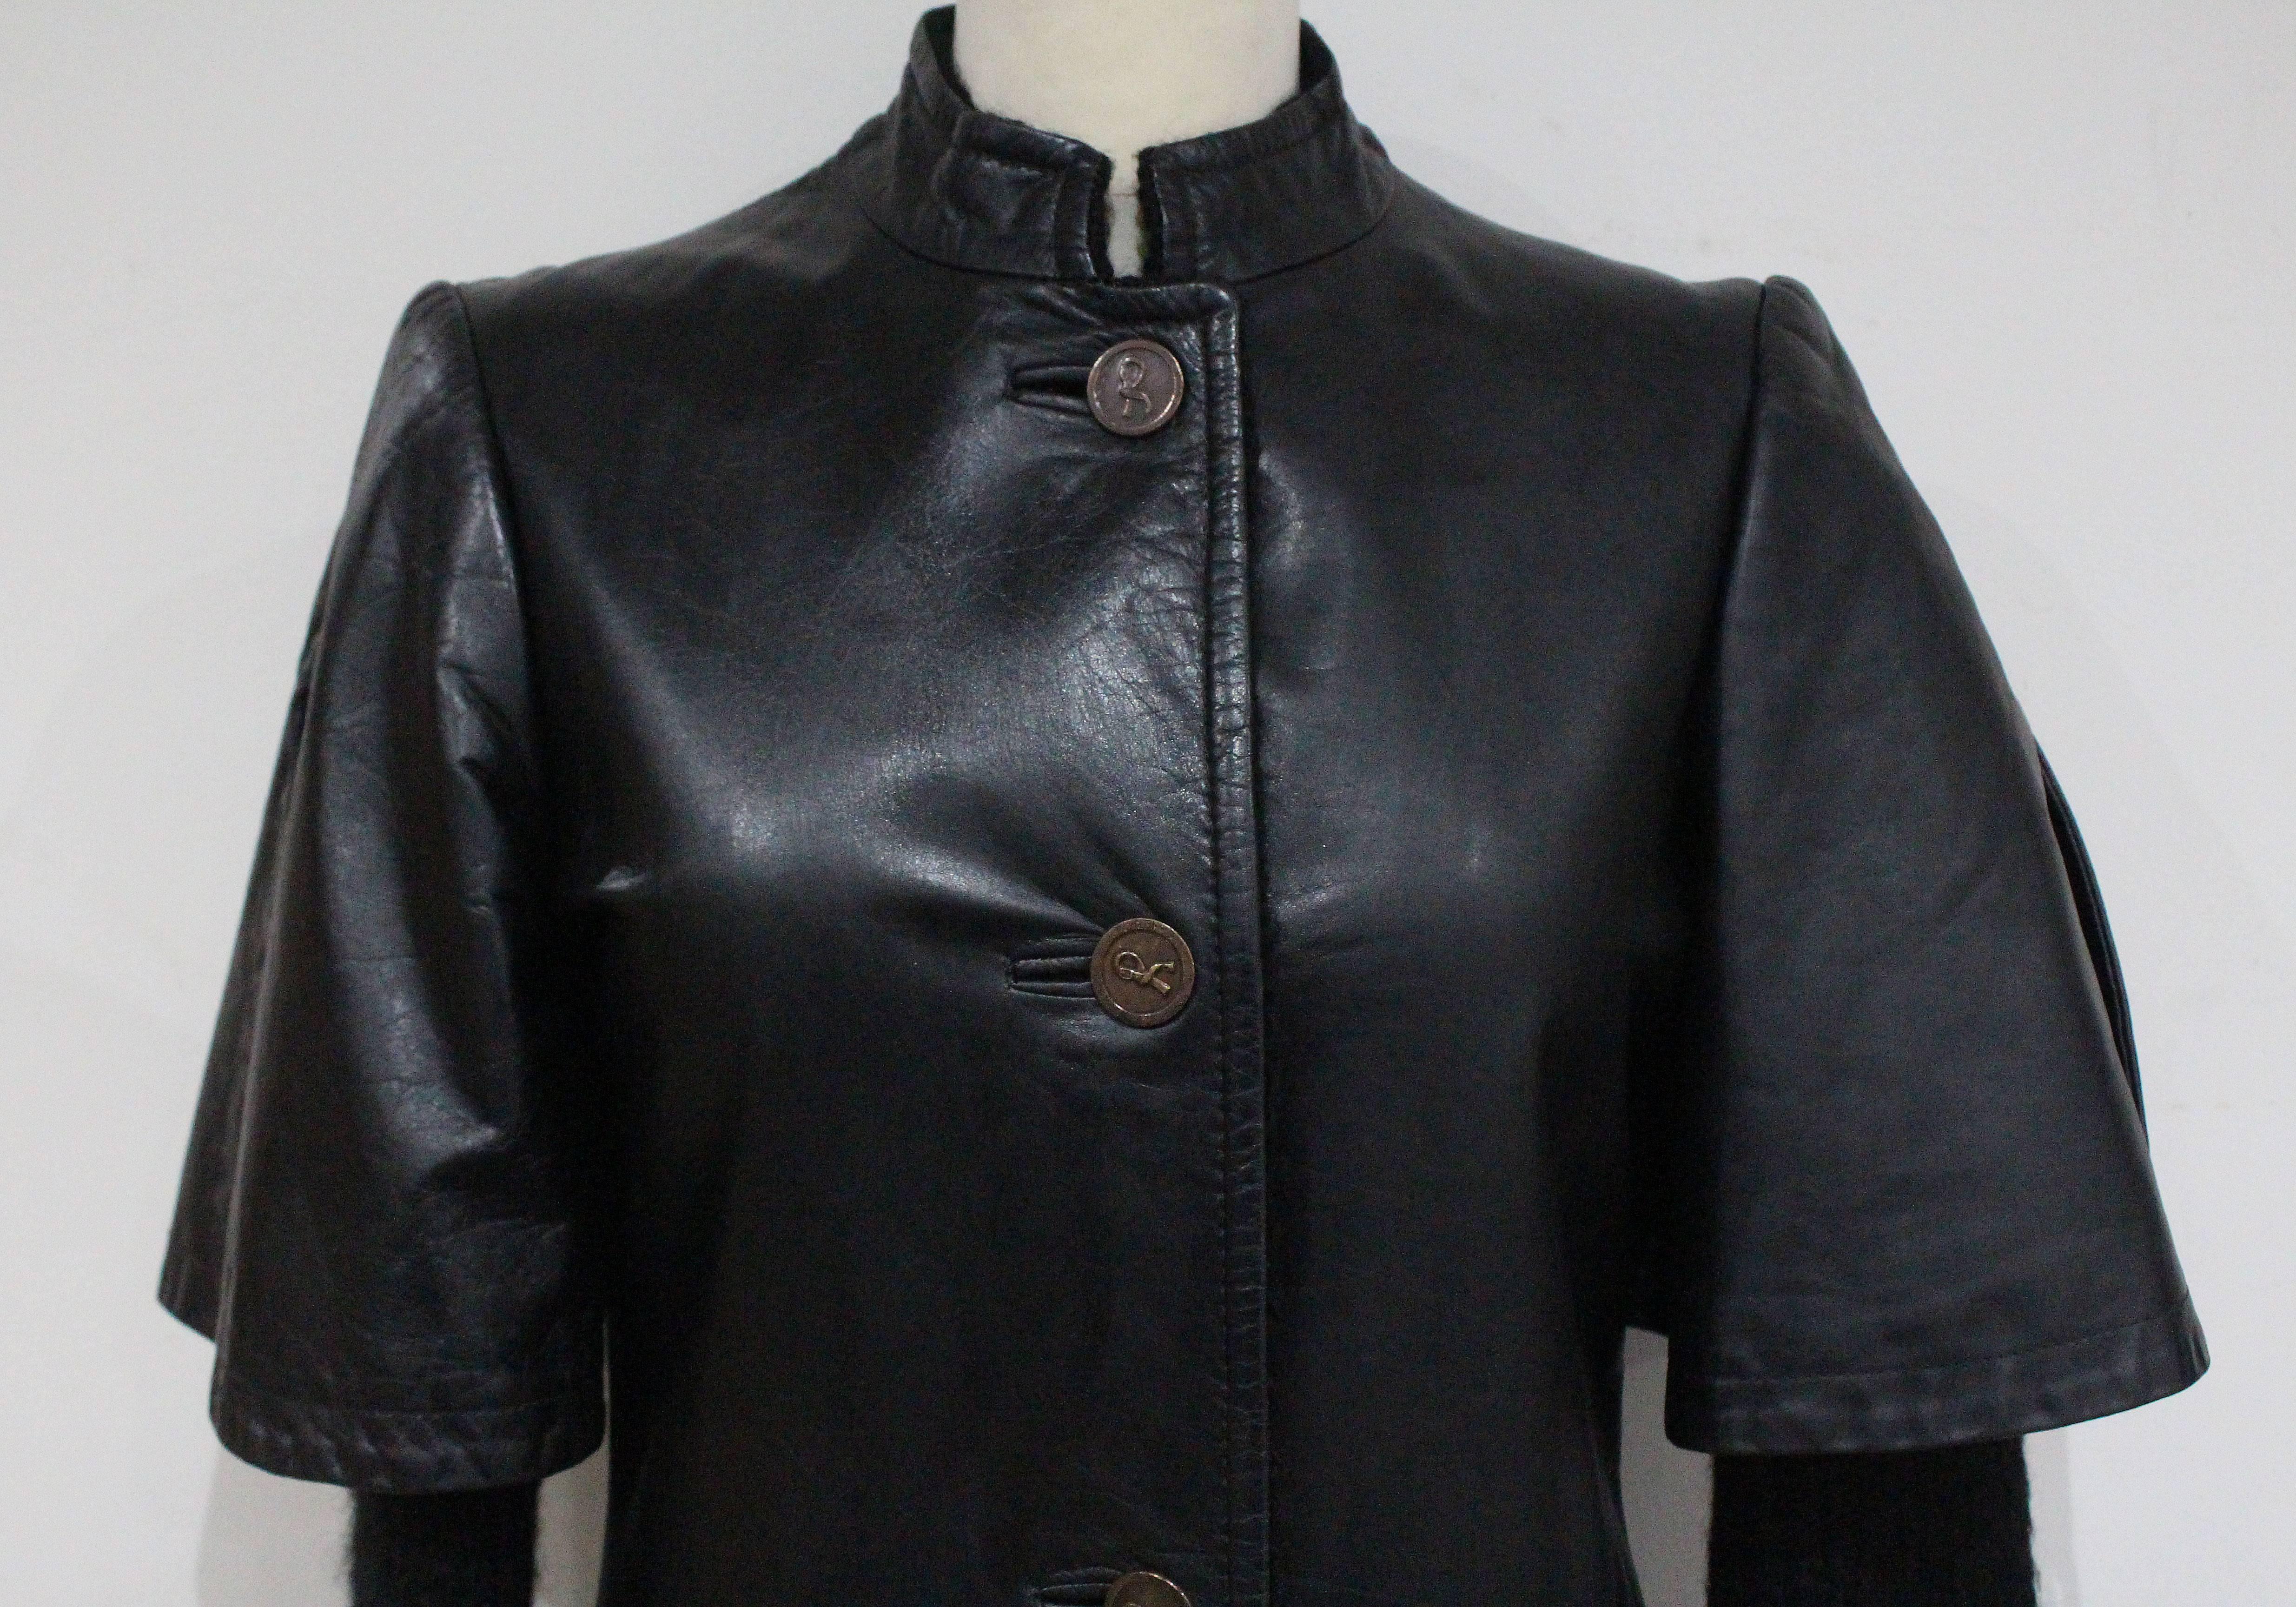 Black Roberta Di Camerino leather coat with knitted sleeves, c. 1970s